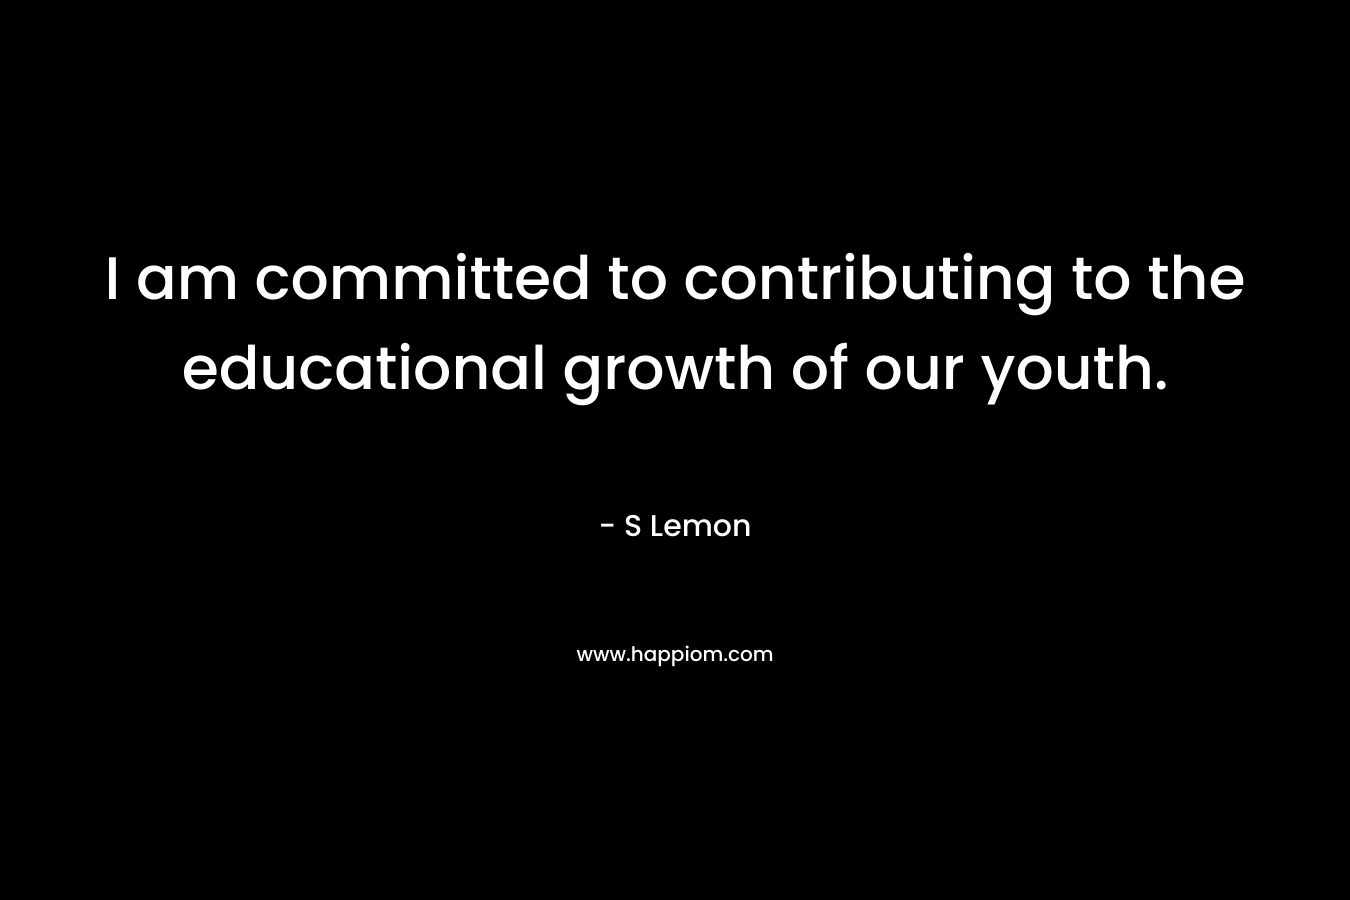 I am committed to contributing to the educational growth of our youth. – S Lemon